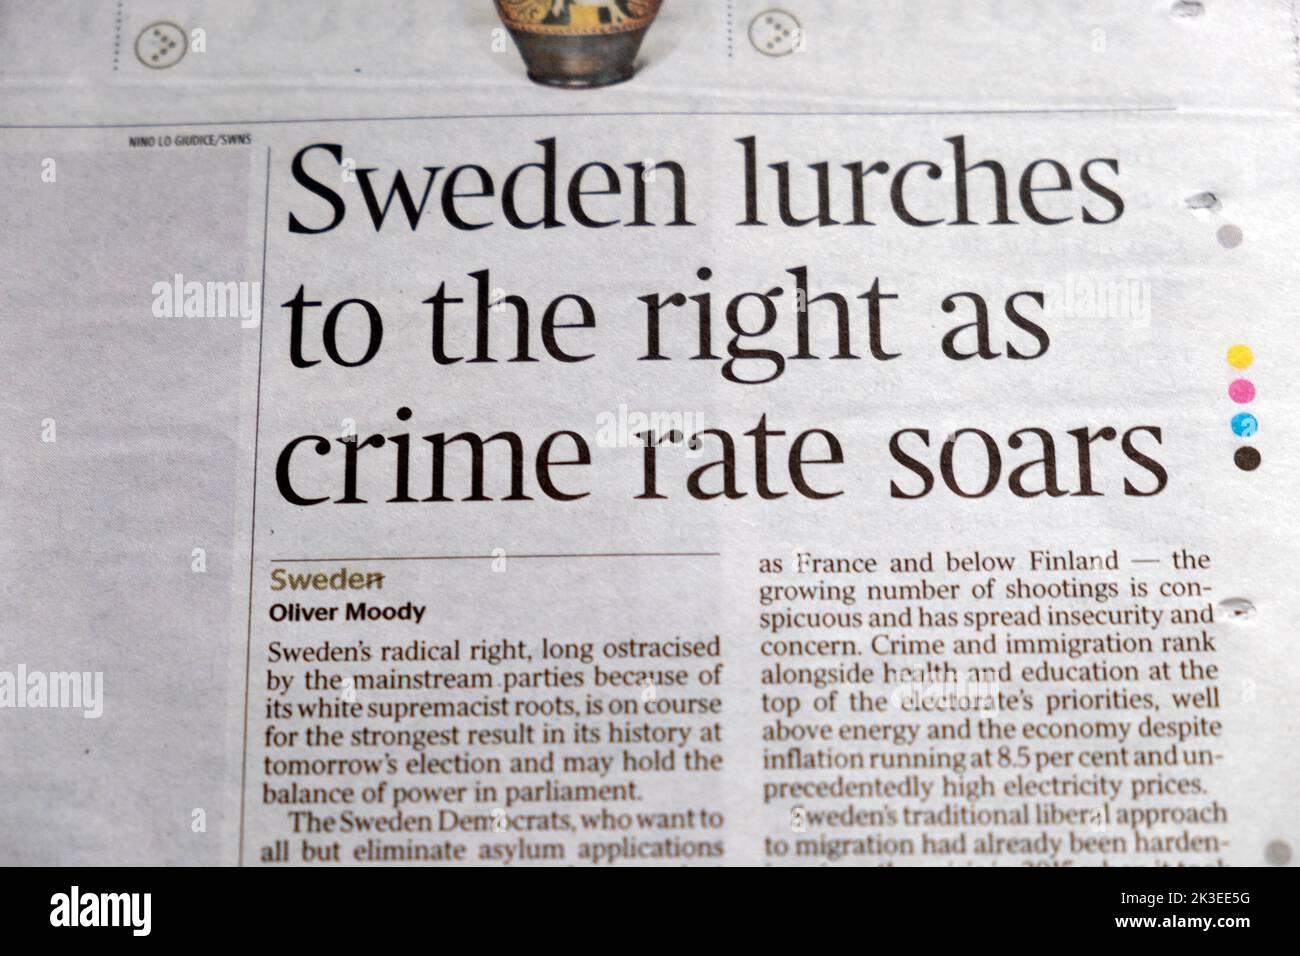 'Sweet Lurches to the right as crime rate soars' The Times journal titre article coupure 10 septembre 2022 Londres UK Banque D'Images